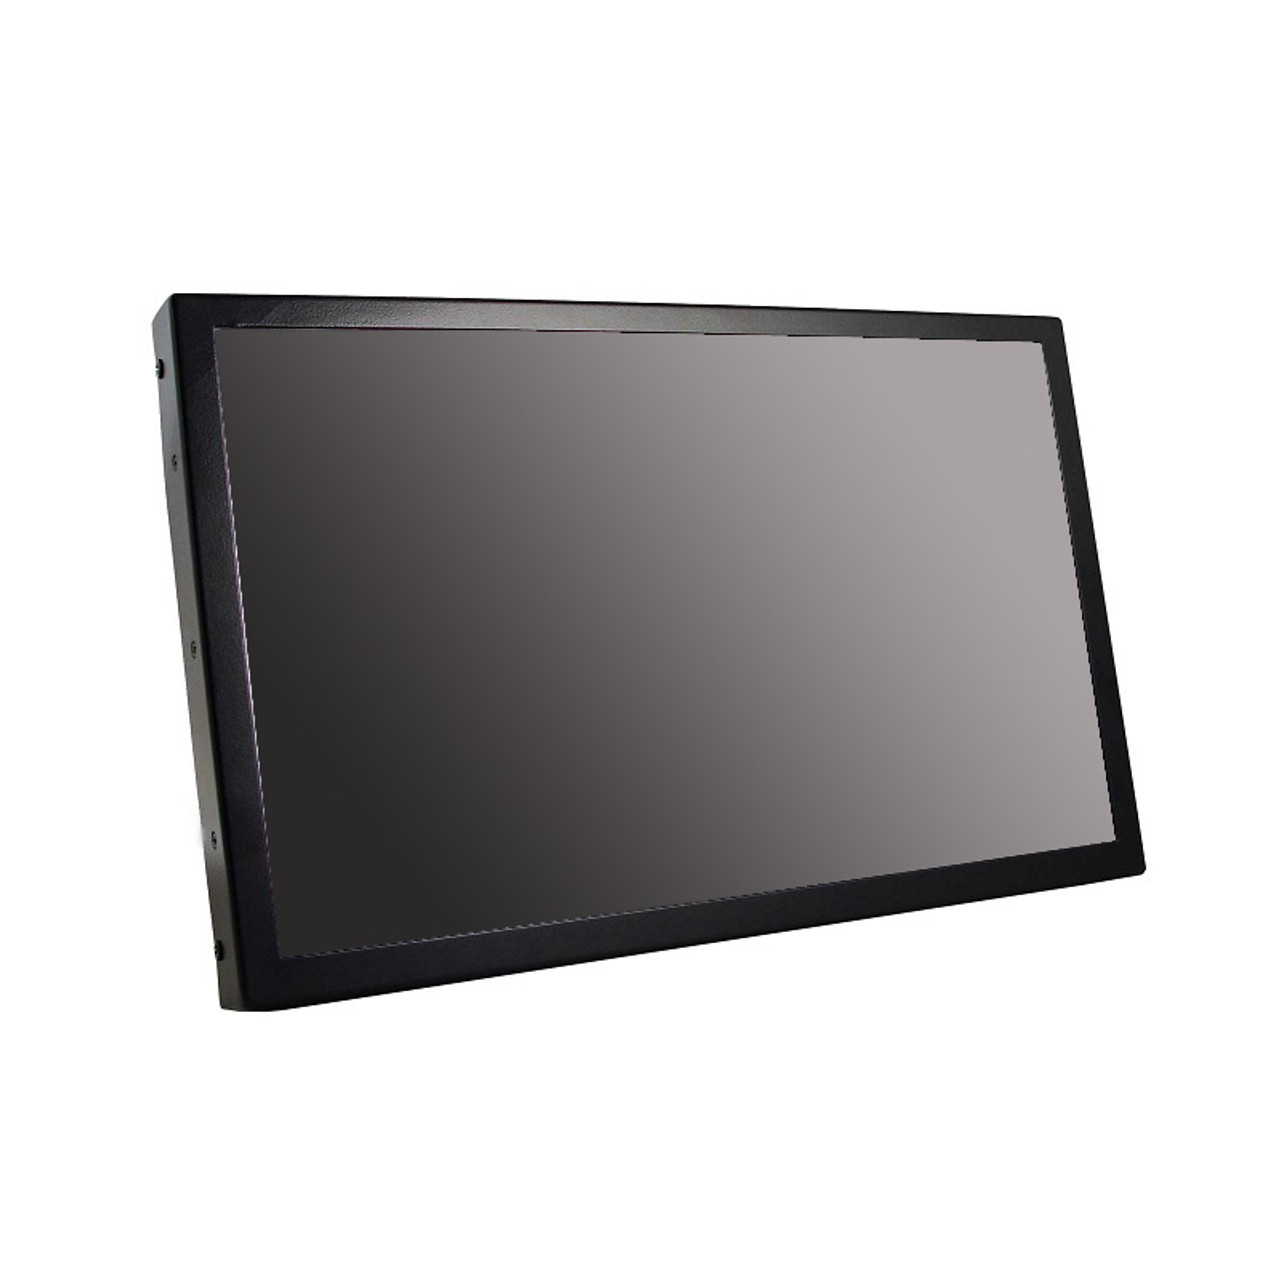 NWC1D - Dell 14-inch FHD LED LCD Touchscreen Latitude E7440